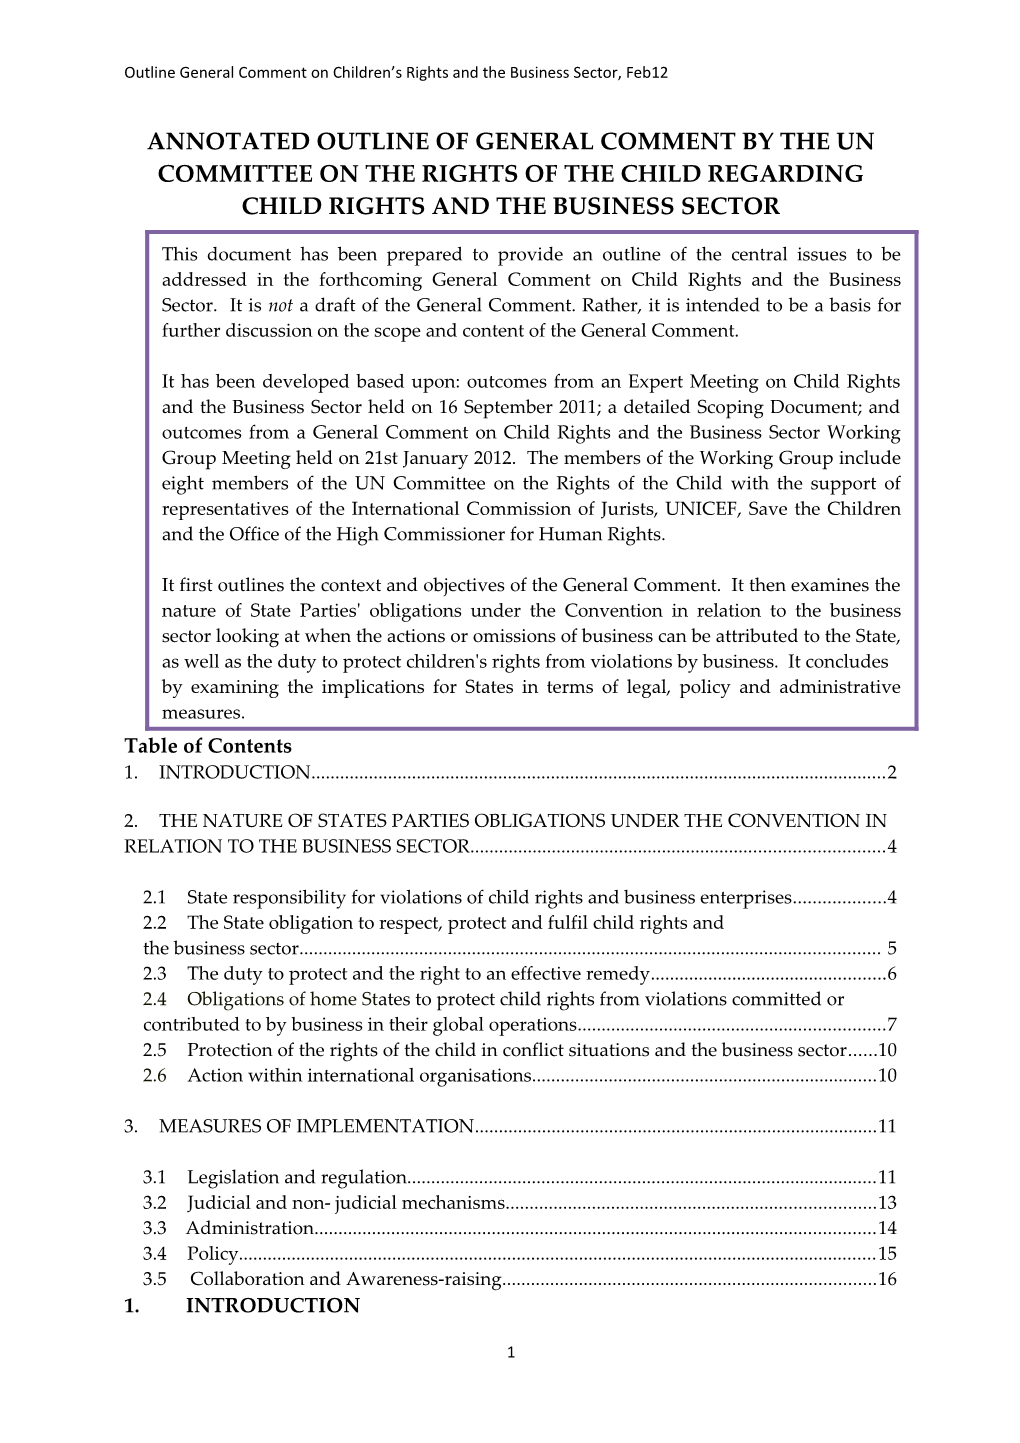 Annotated Outline of General Comment by the Un Committee on the Rights of the Child Regarding